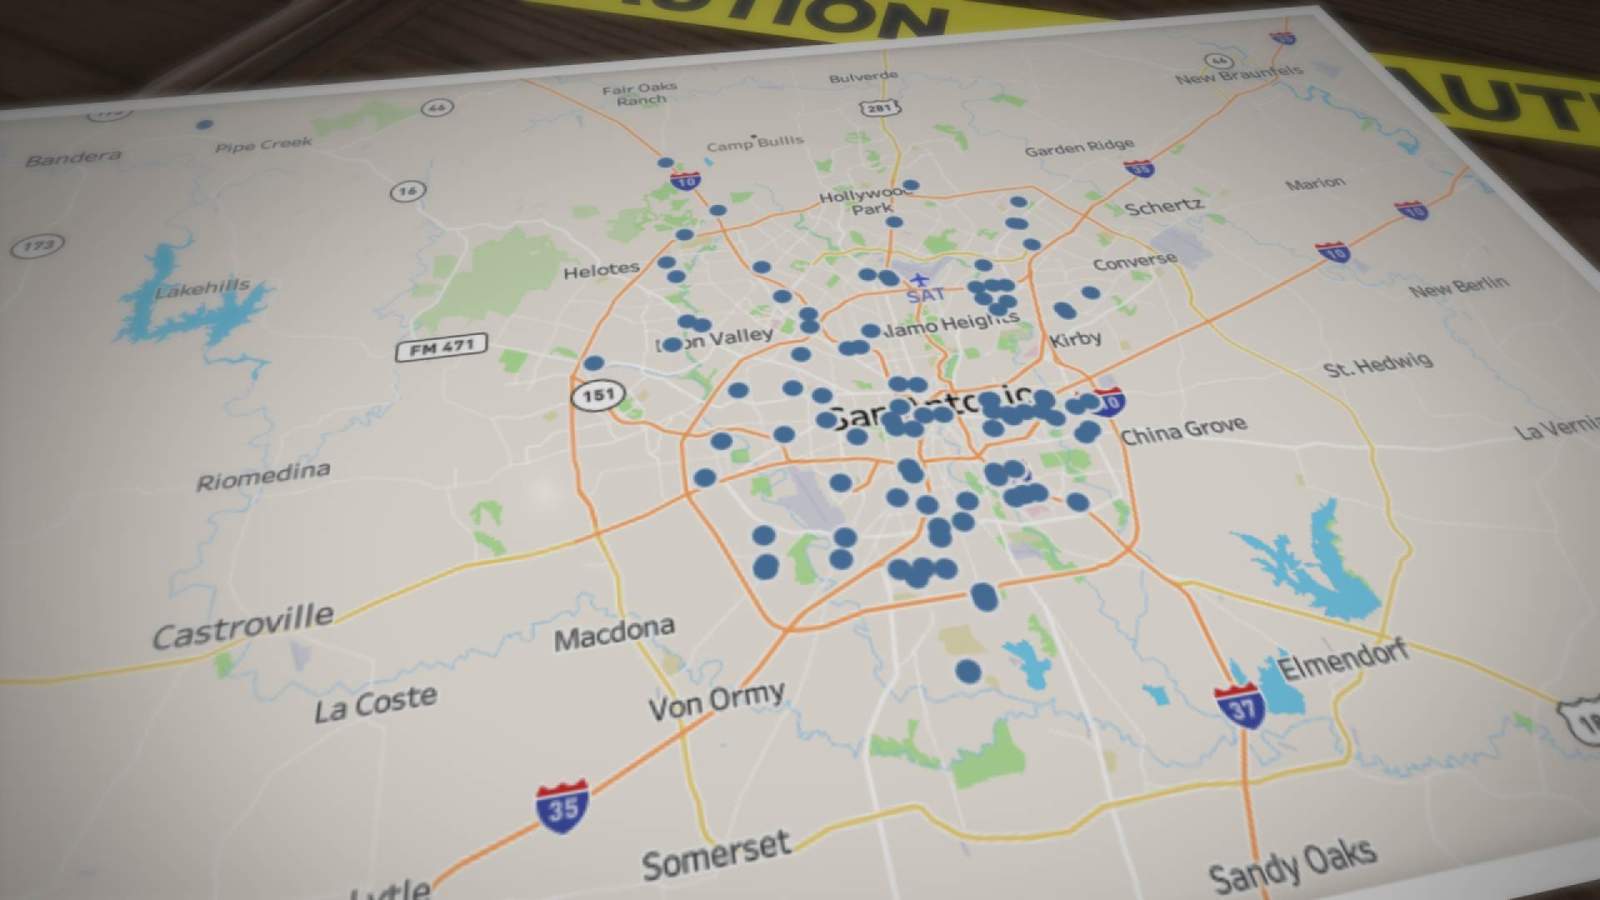 Murder map: 105 homicides were reported in San Antonio in 2019. Here’s what we know.